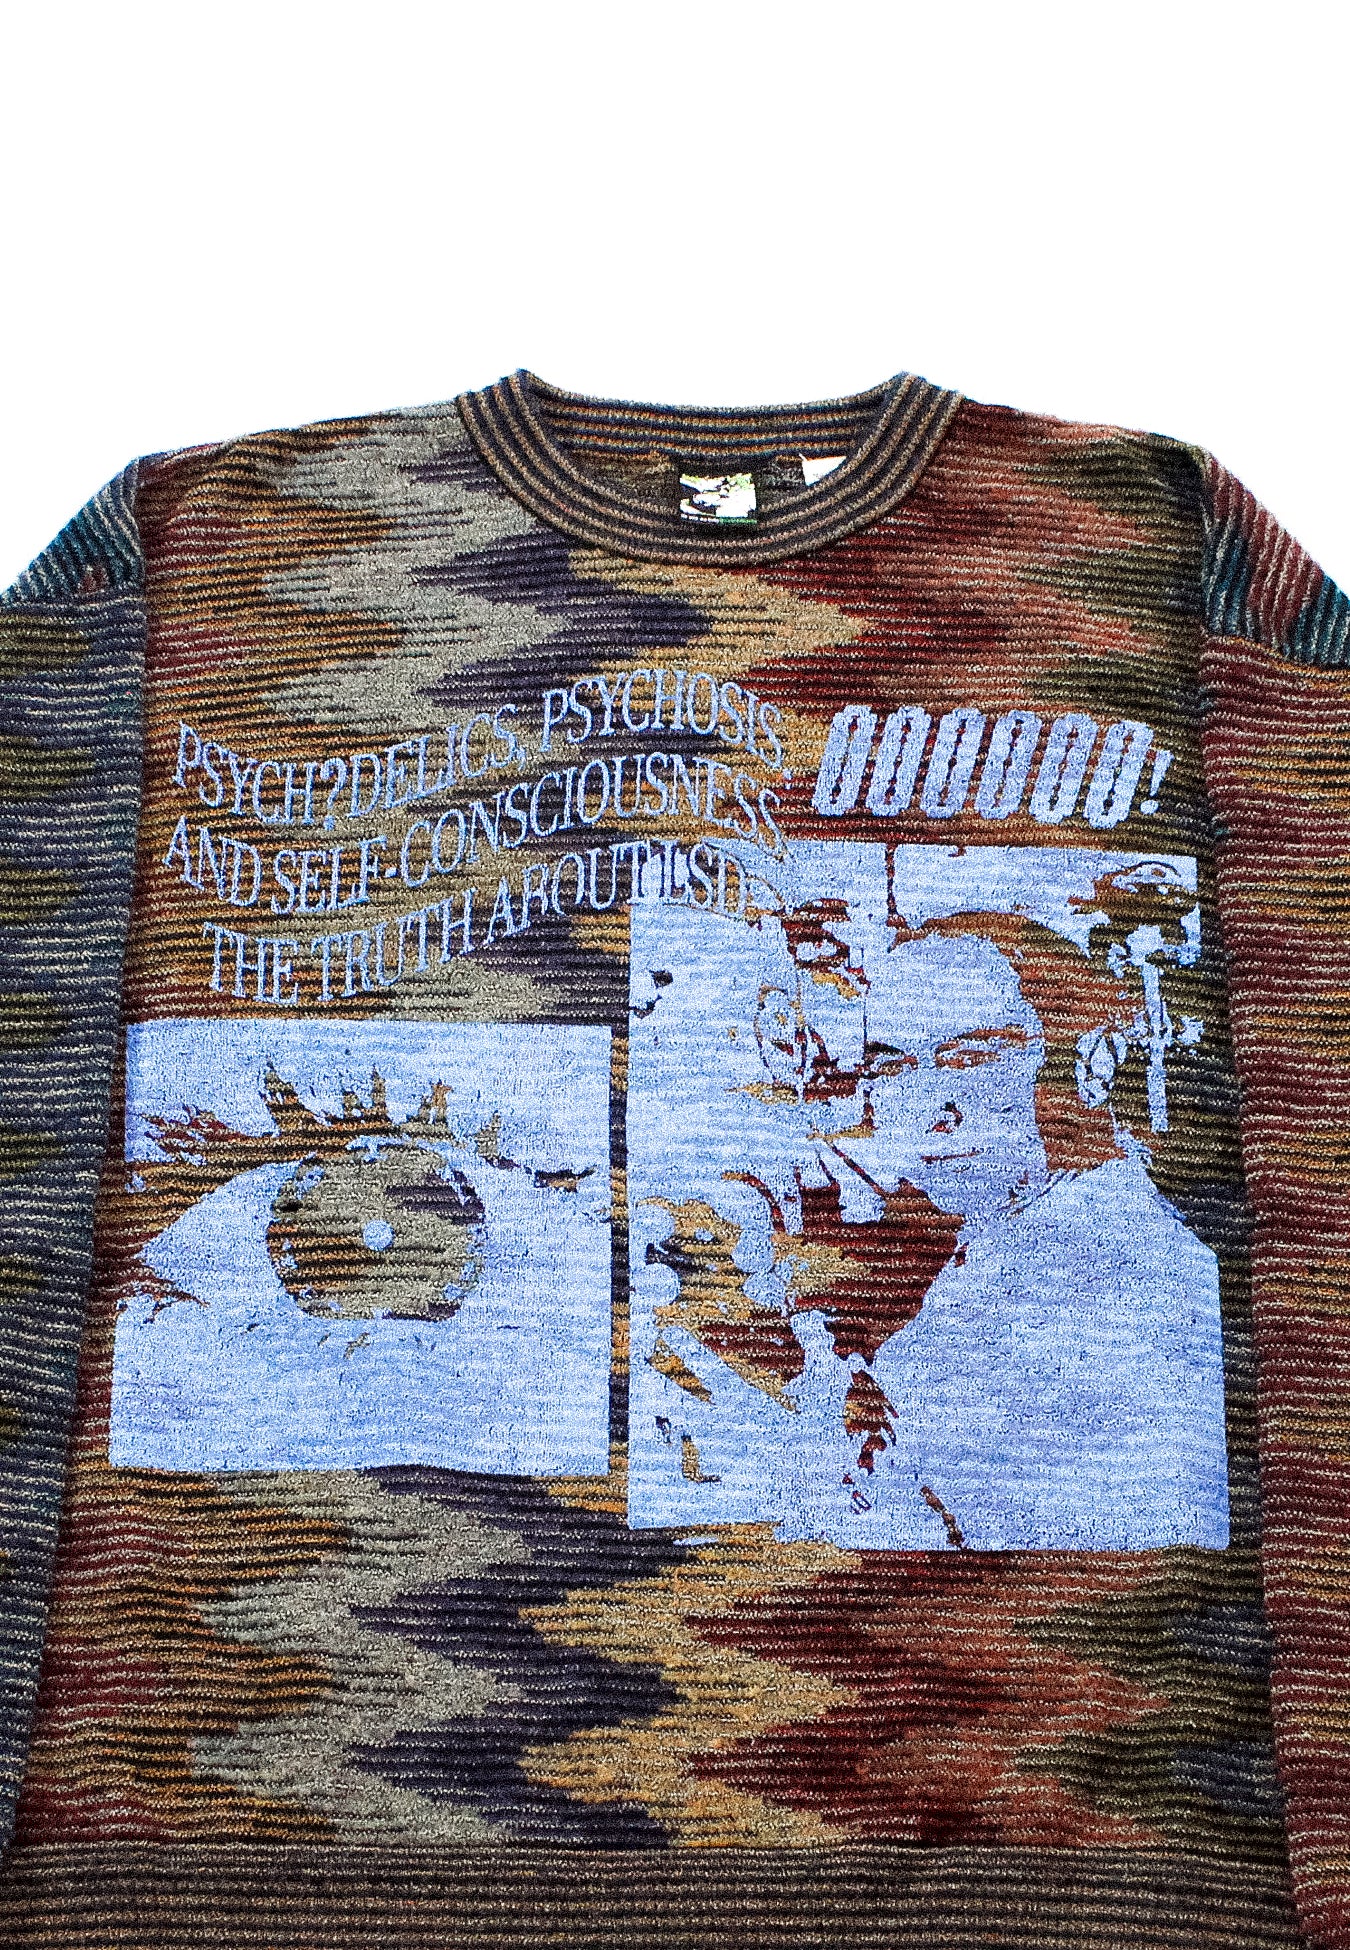 "PSYCHEDELICS, PSYCHOSIS, AND SELF-CONSCIOUSNESS" Heavyweight Knit (XL)